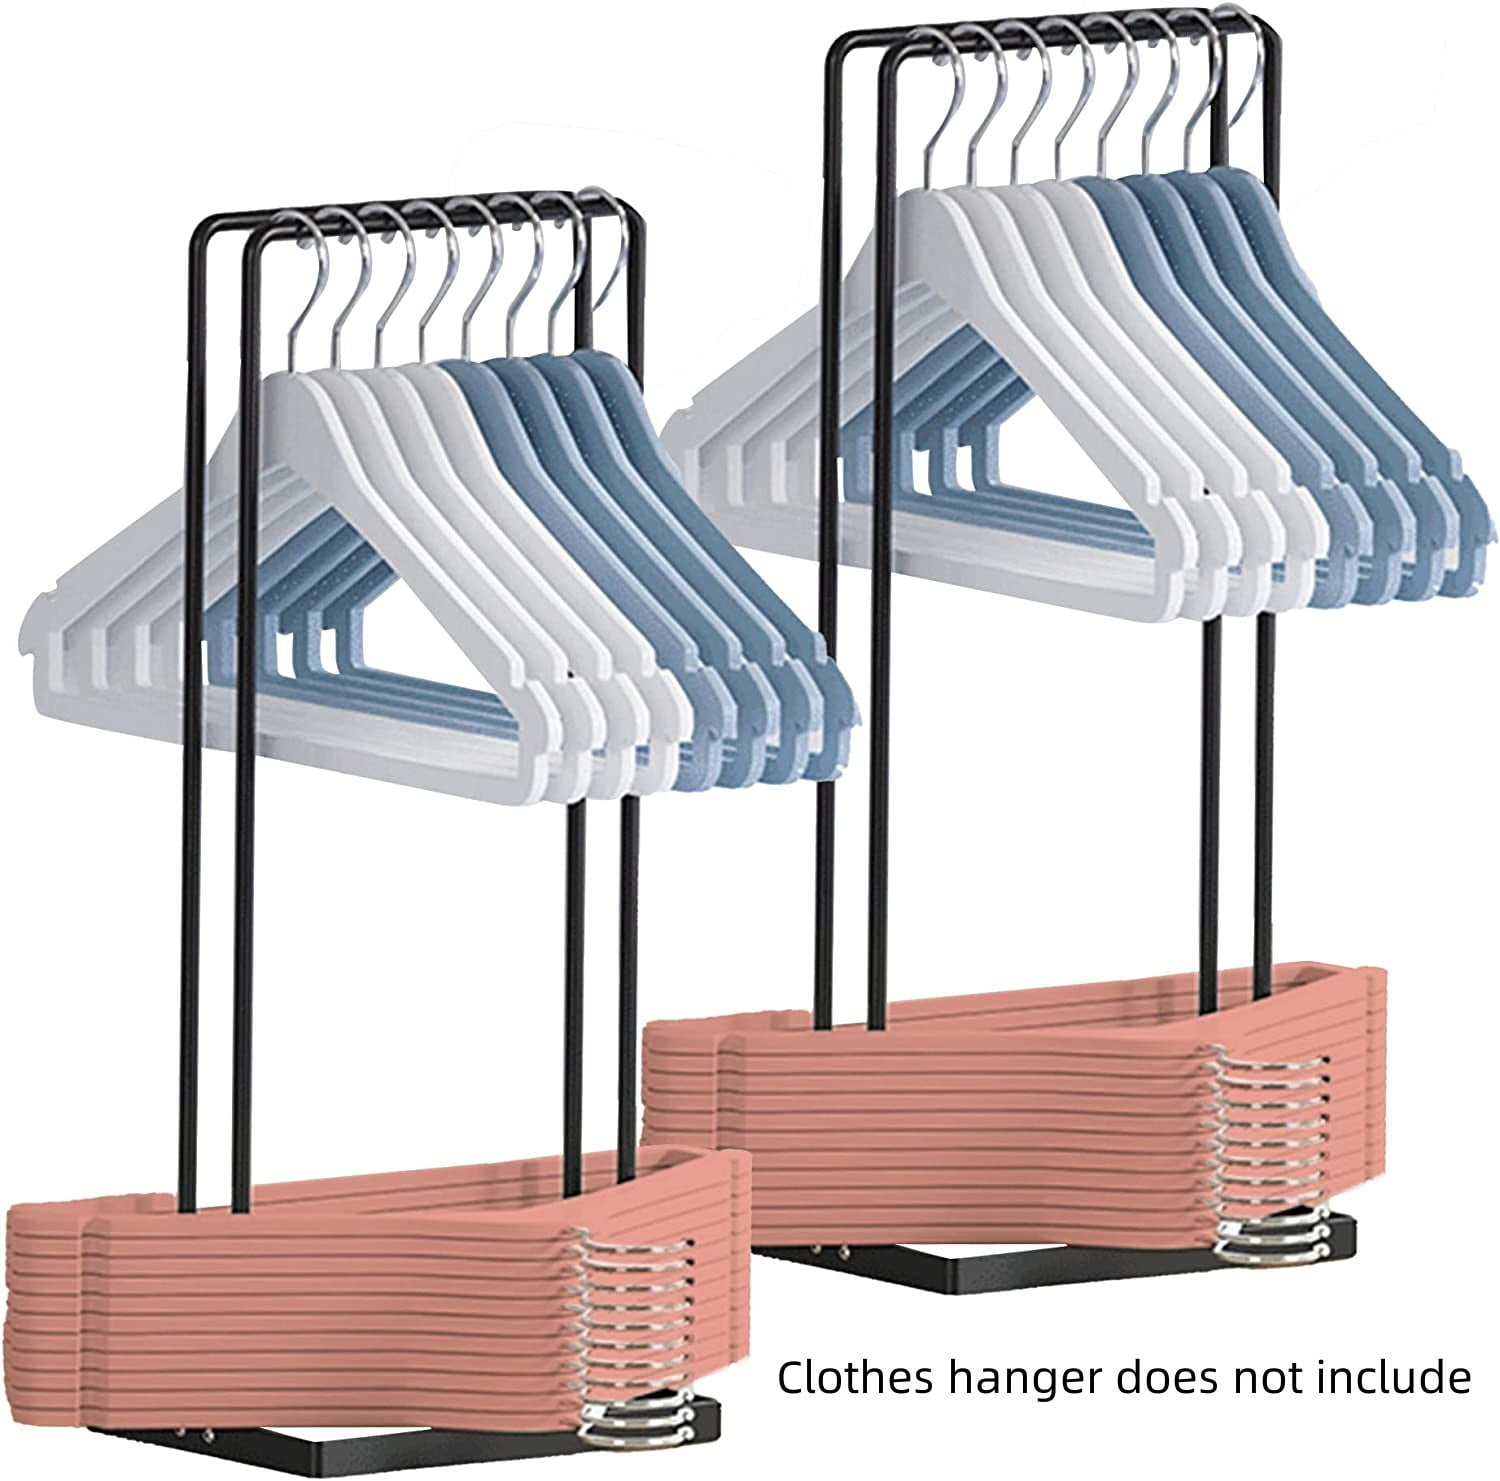 HAKDAY Hanger Storage Rack, Portable Hanger Organizer Rack, Hanger Stacker  Hanger Storage Holder Hanger Caddy for Closet Laundry Dry Cleaning Room